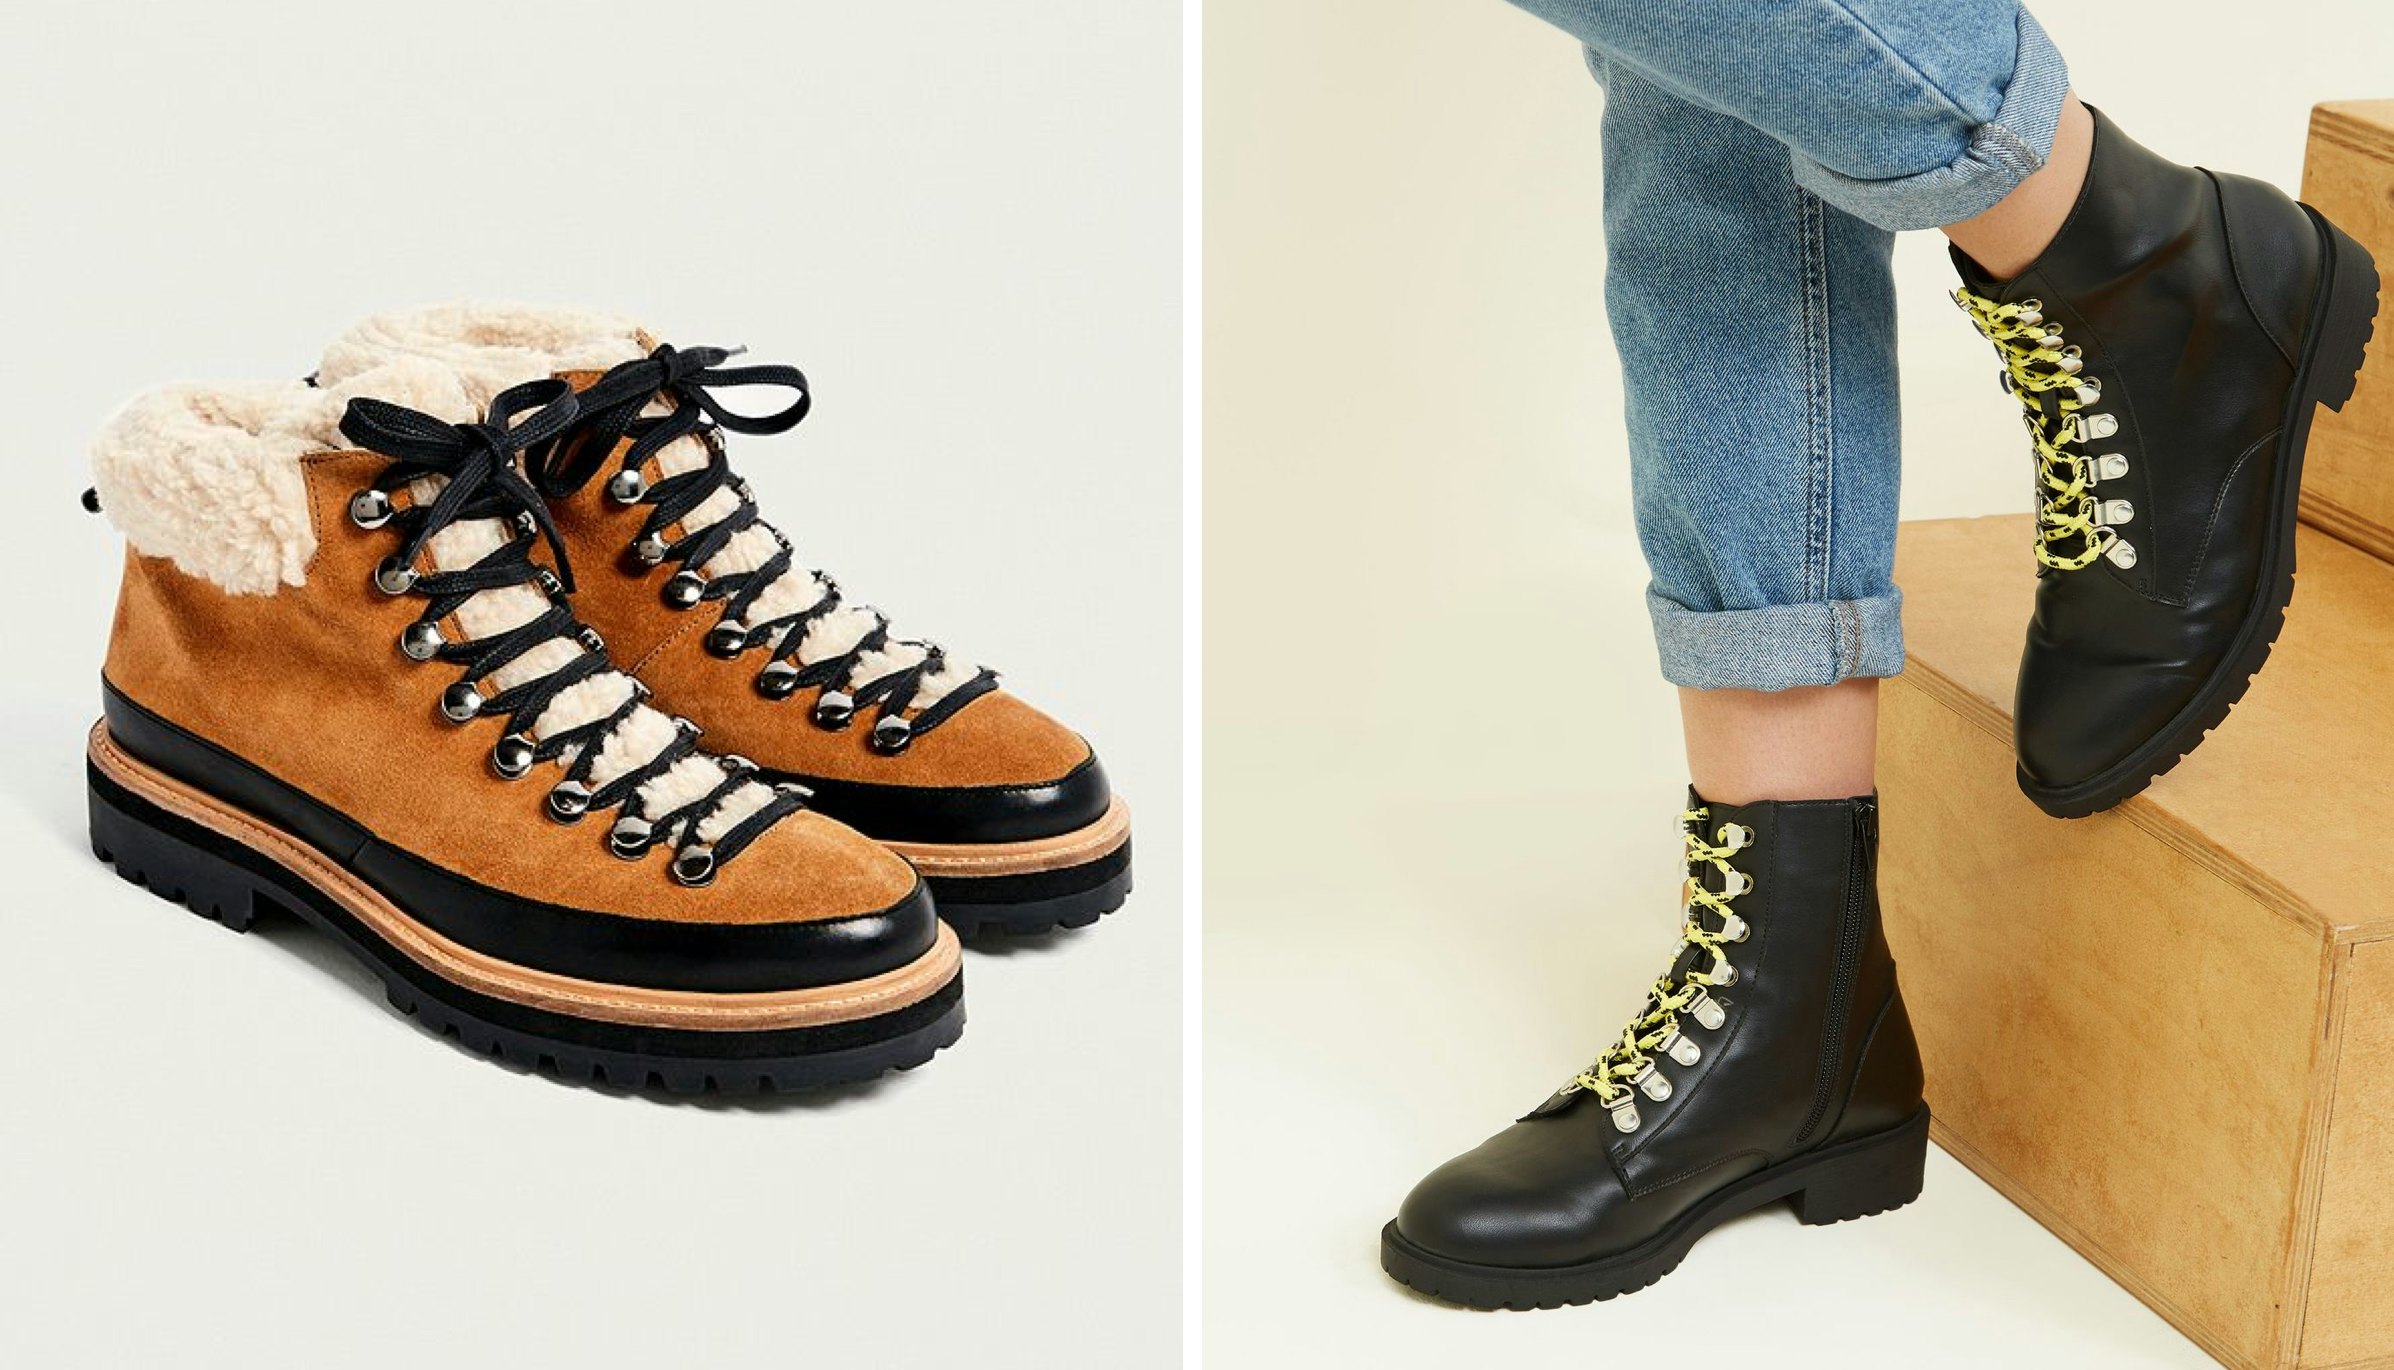 Fashion Hiking Boots To Buy This Winter 